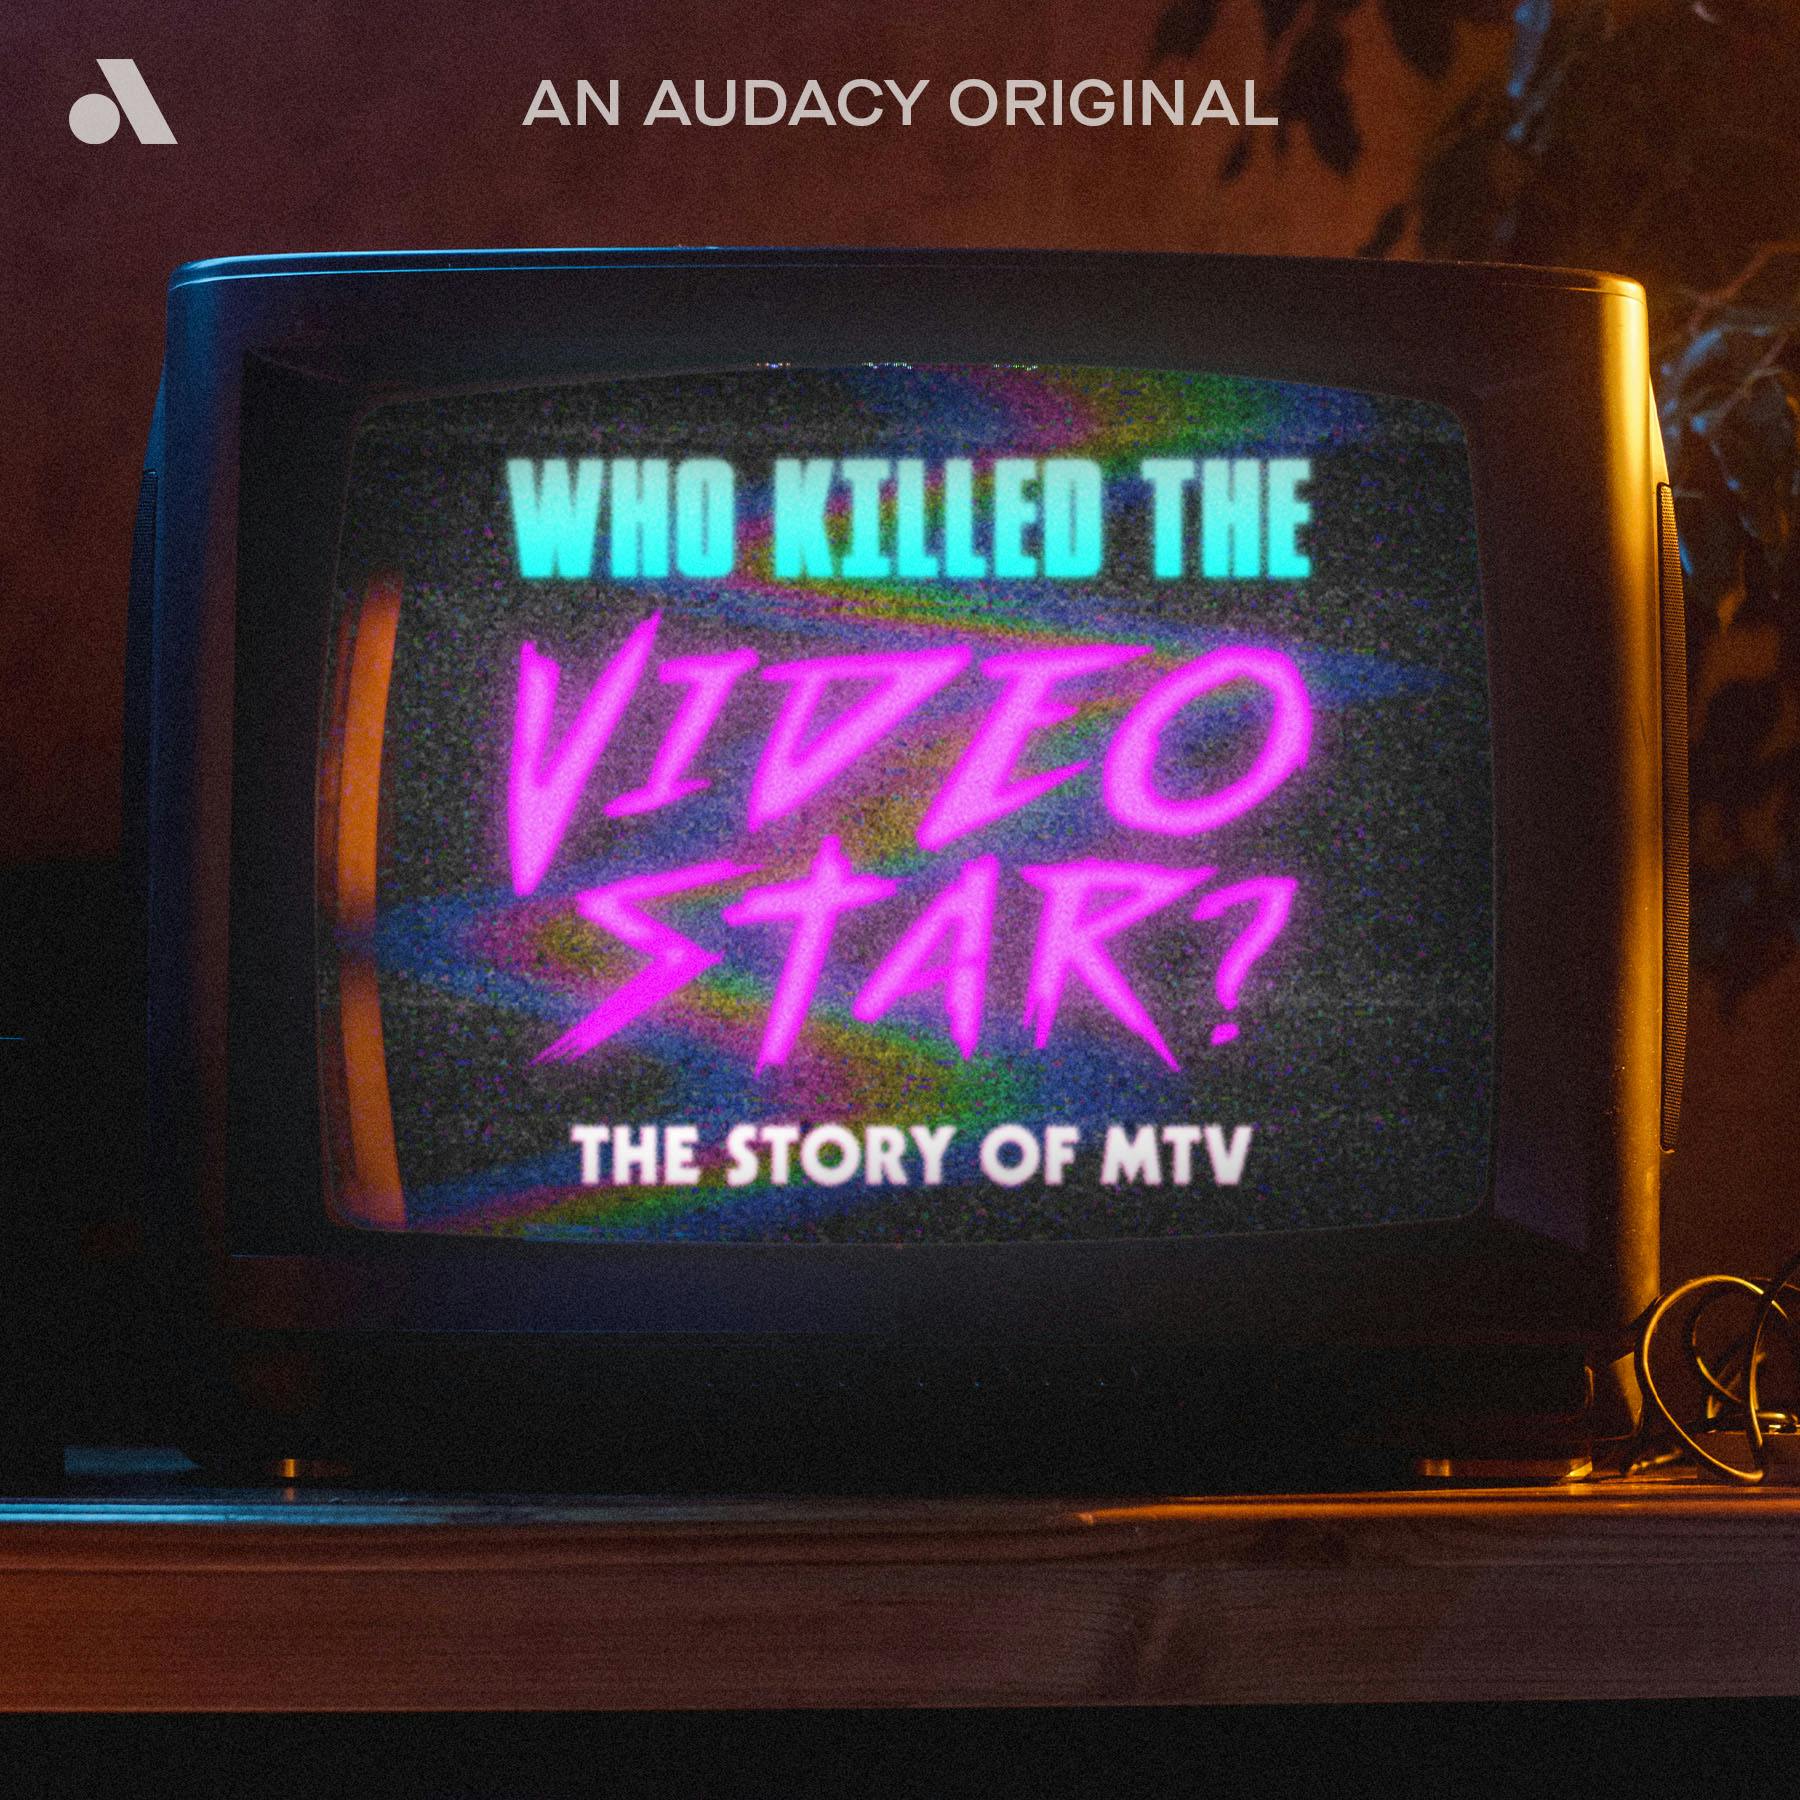 Who Killed the Video Star: The Story of MTV by Audacy Studios